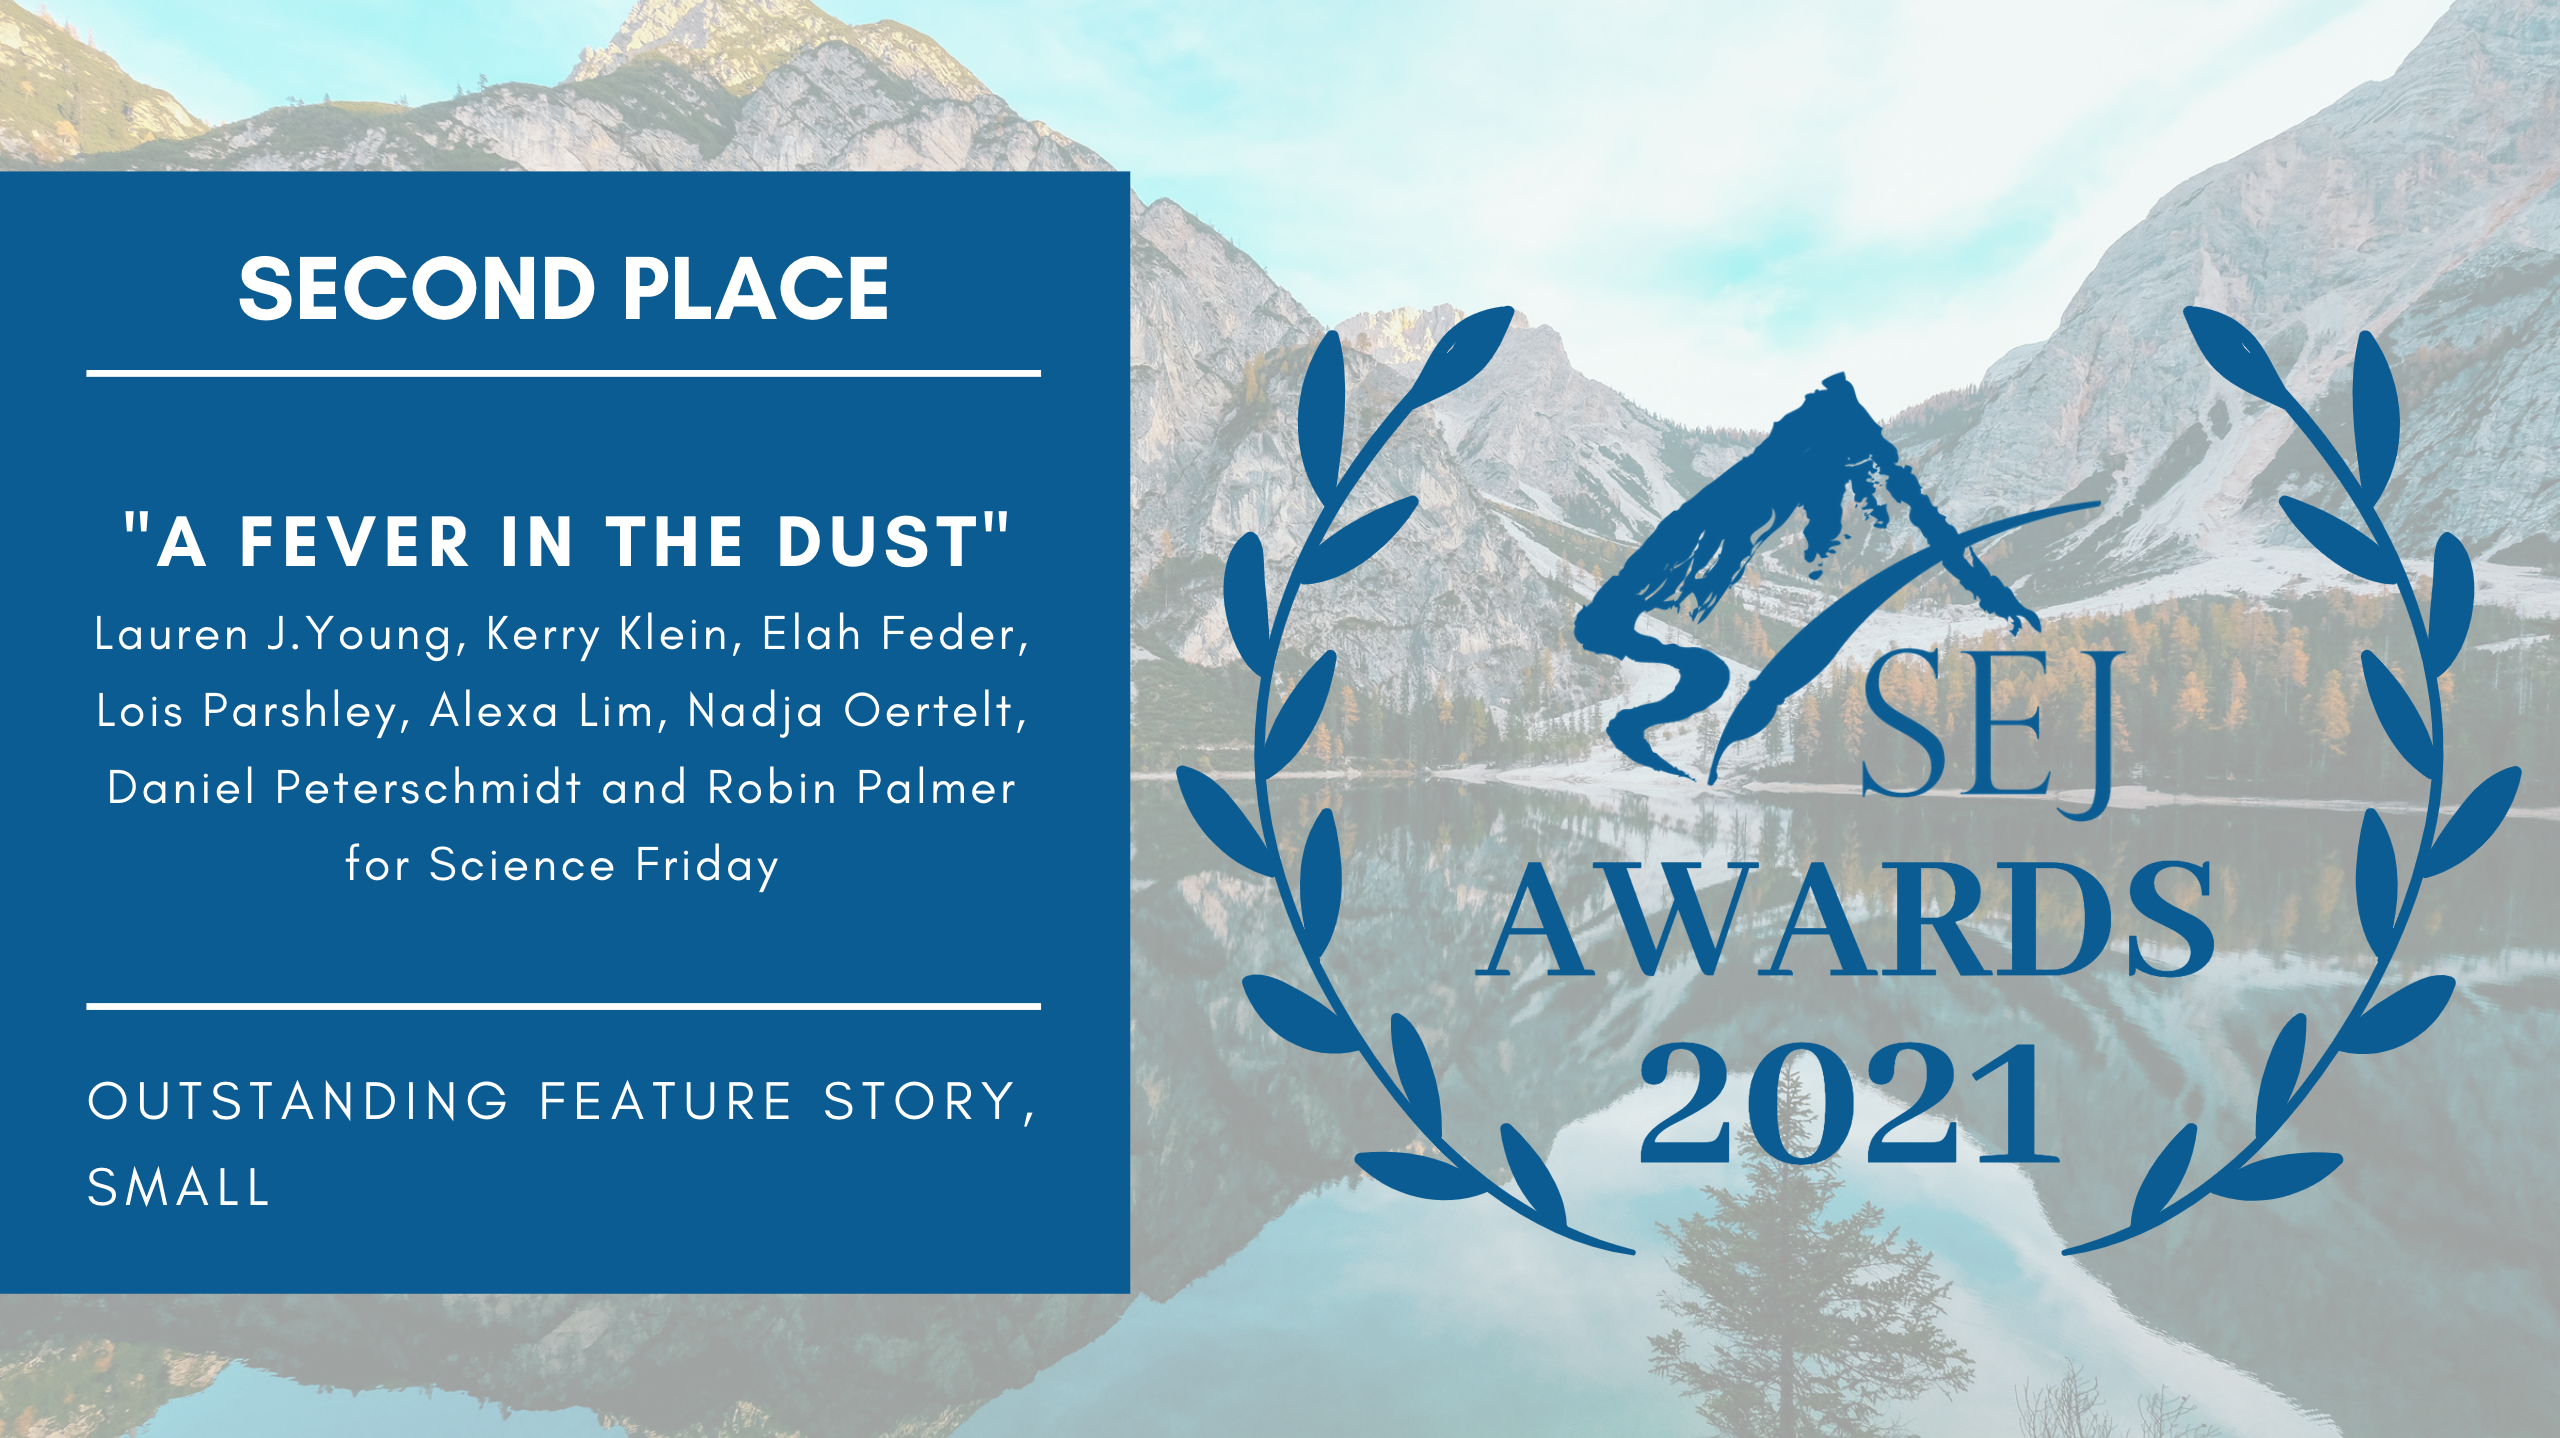 a banner with mountains and blue logo that reads sej awards 2021 in a blue box on the left there is some text in white that reads second place: a fever in the dust. lauren j. young, kerry klein, elah feder, lois parshley, alexa lim, nadja oertelt, daniel peterschmidt, and robin palmer for science friday. outstanding feature story, small